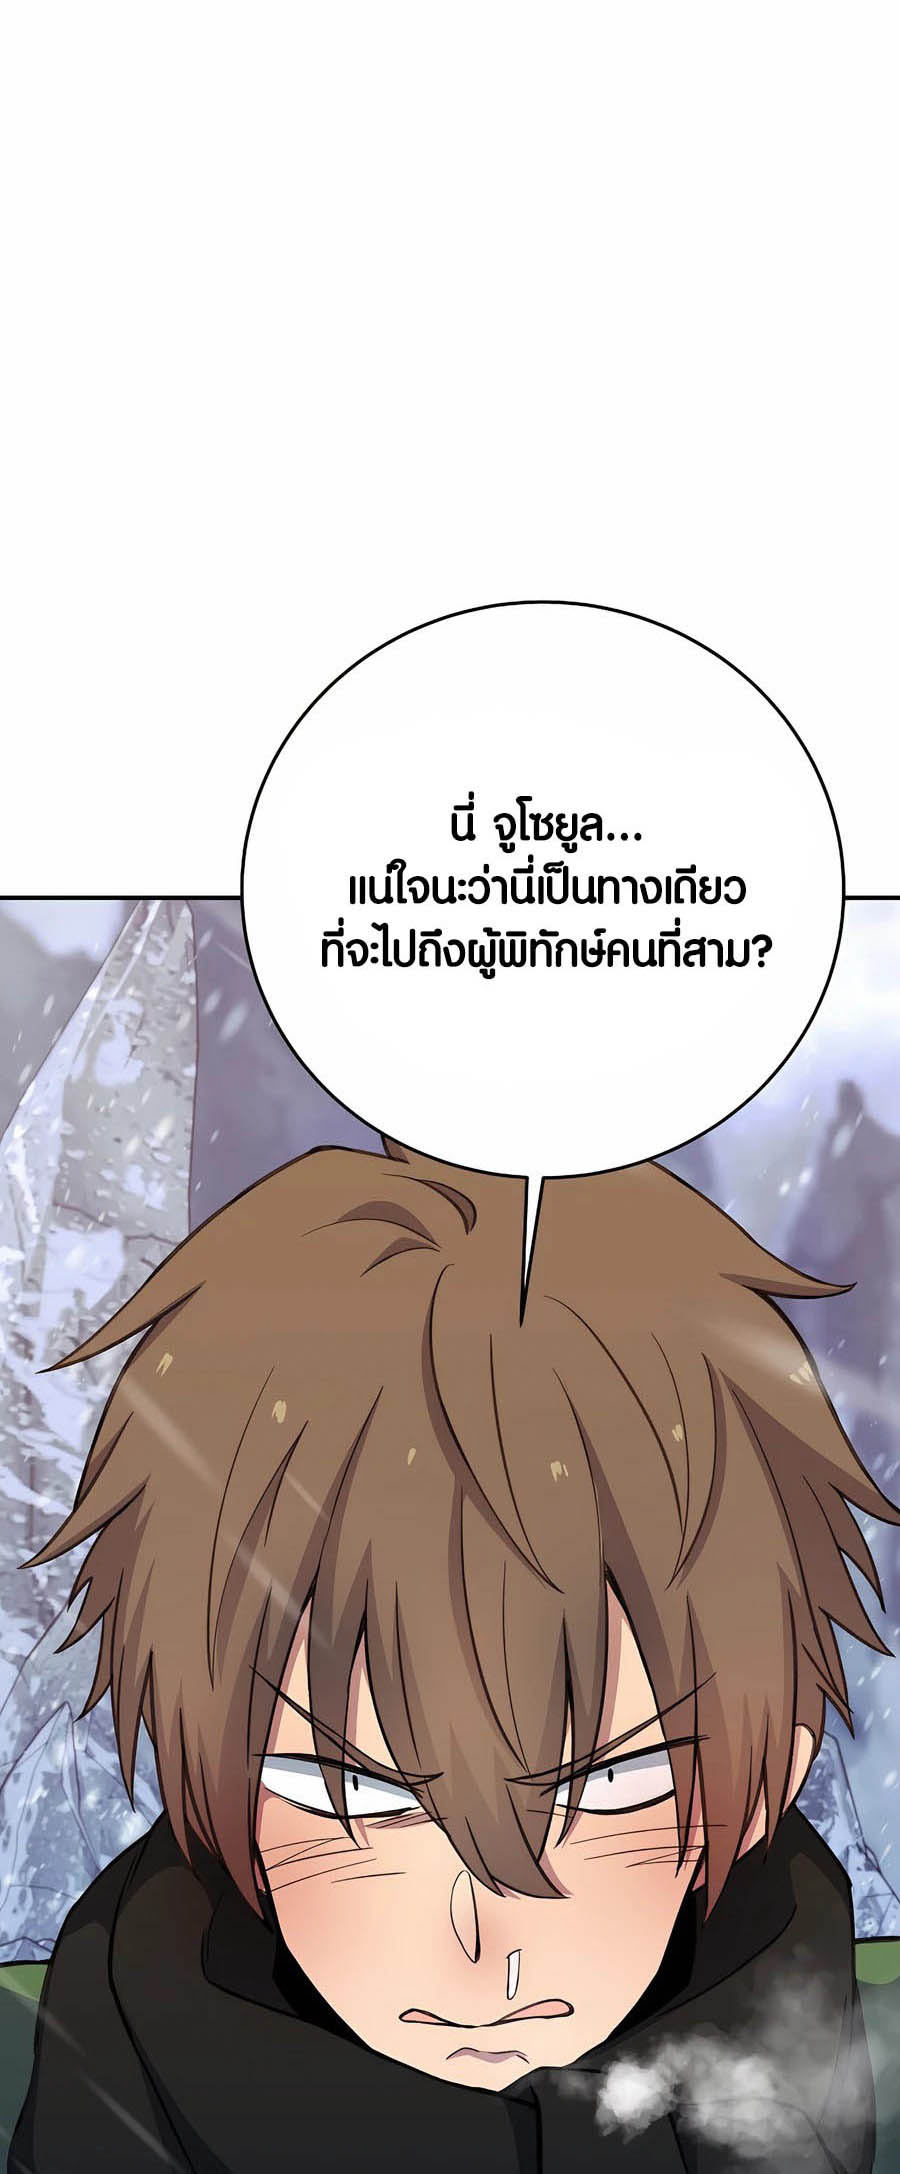 à¸­à¹ˆà¸²à¸™à¸¡à¸±à¸™à¸®à¸§à¸² à¹€à¸£à¸·à¹ˆà¸­à¸‡ The Part Time Land of the Gods 57 22